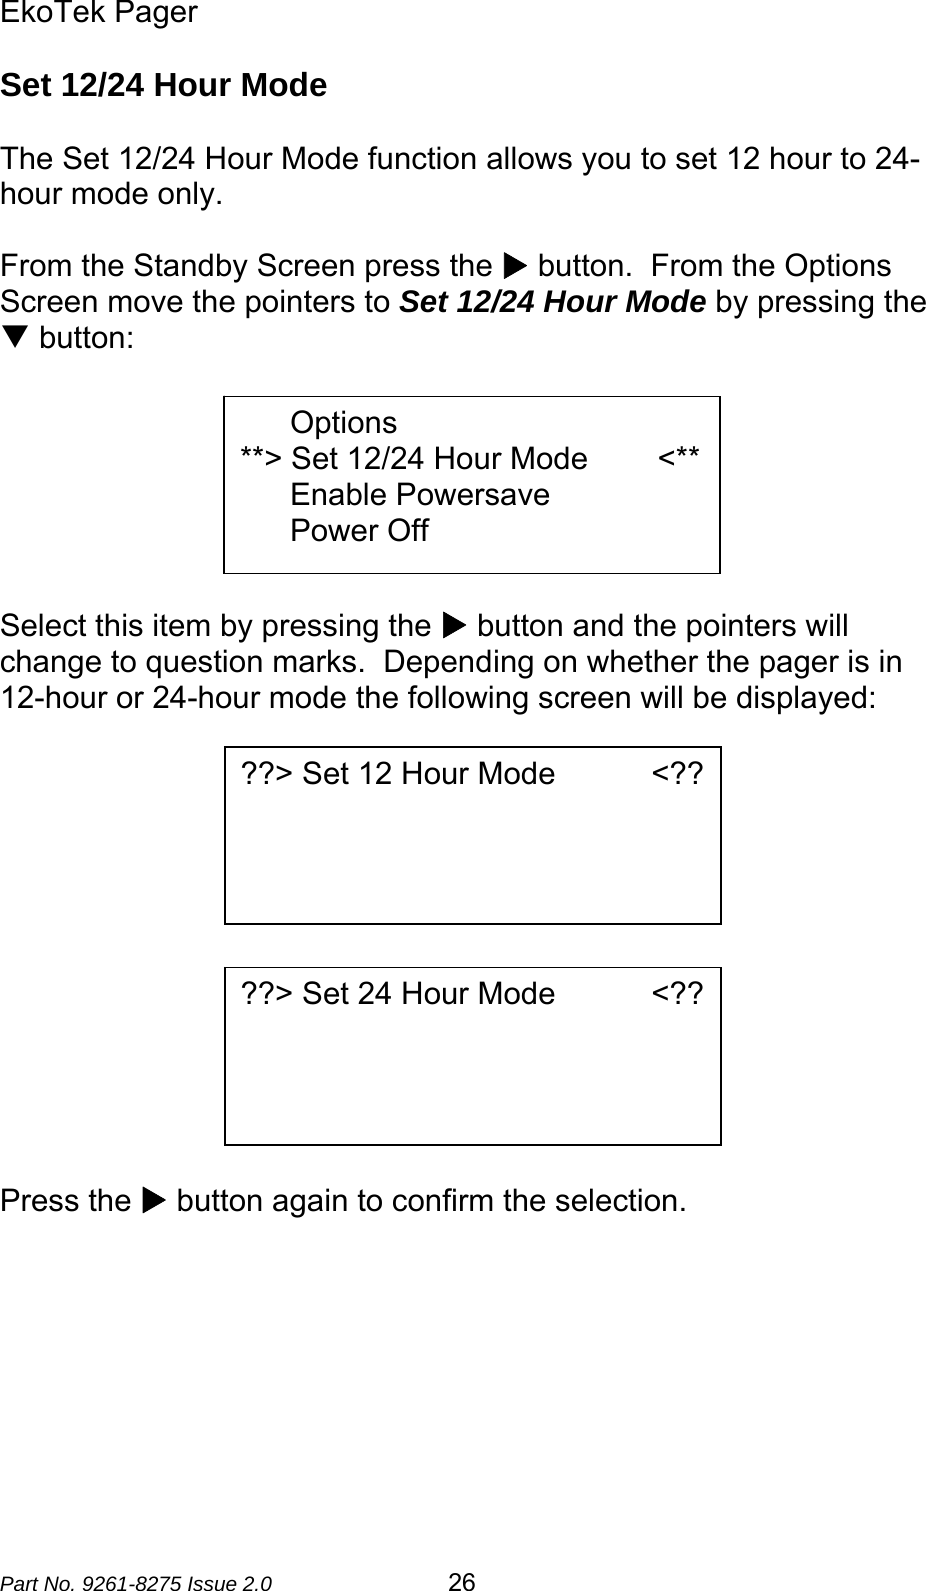 EkoTek Pager  Part No. 9261-8275 Issue 2.0   26 Set 12/24 Hour Mode  The Set 12/24 Hour Mode function allows you to set 12 hour to 24-hour mode only.  From the Standby Screen press the X button.  From the Options Screen move the pointers to Set 12/24 Hour Mode by pressing the T button:        Select this item by pressing the X button and the pointers will change to question marks.  Depending on whether the pager is in 12-hour or 24-hour mode the following screen will be displayed:              Press the X button again to confirm the selection.        Options **&gt; Set 12/24 Hour Mode        &lt;** Enable Powersave Power Off ??&gt; Set 12 Hour Mode           &lt;?? ??&gt; Set 24 Hour Mode           &lt;?? 